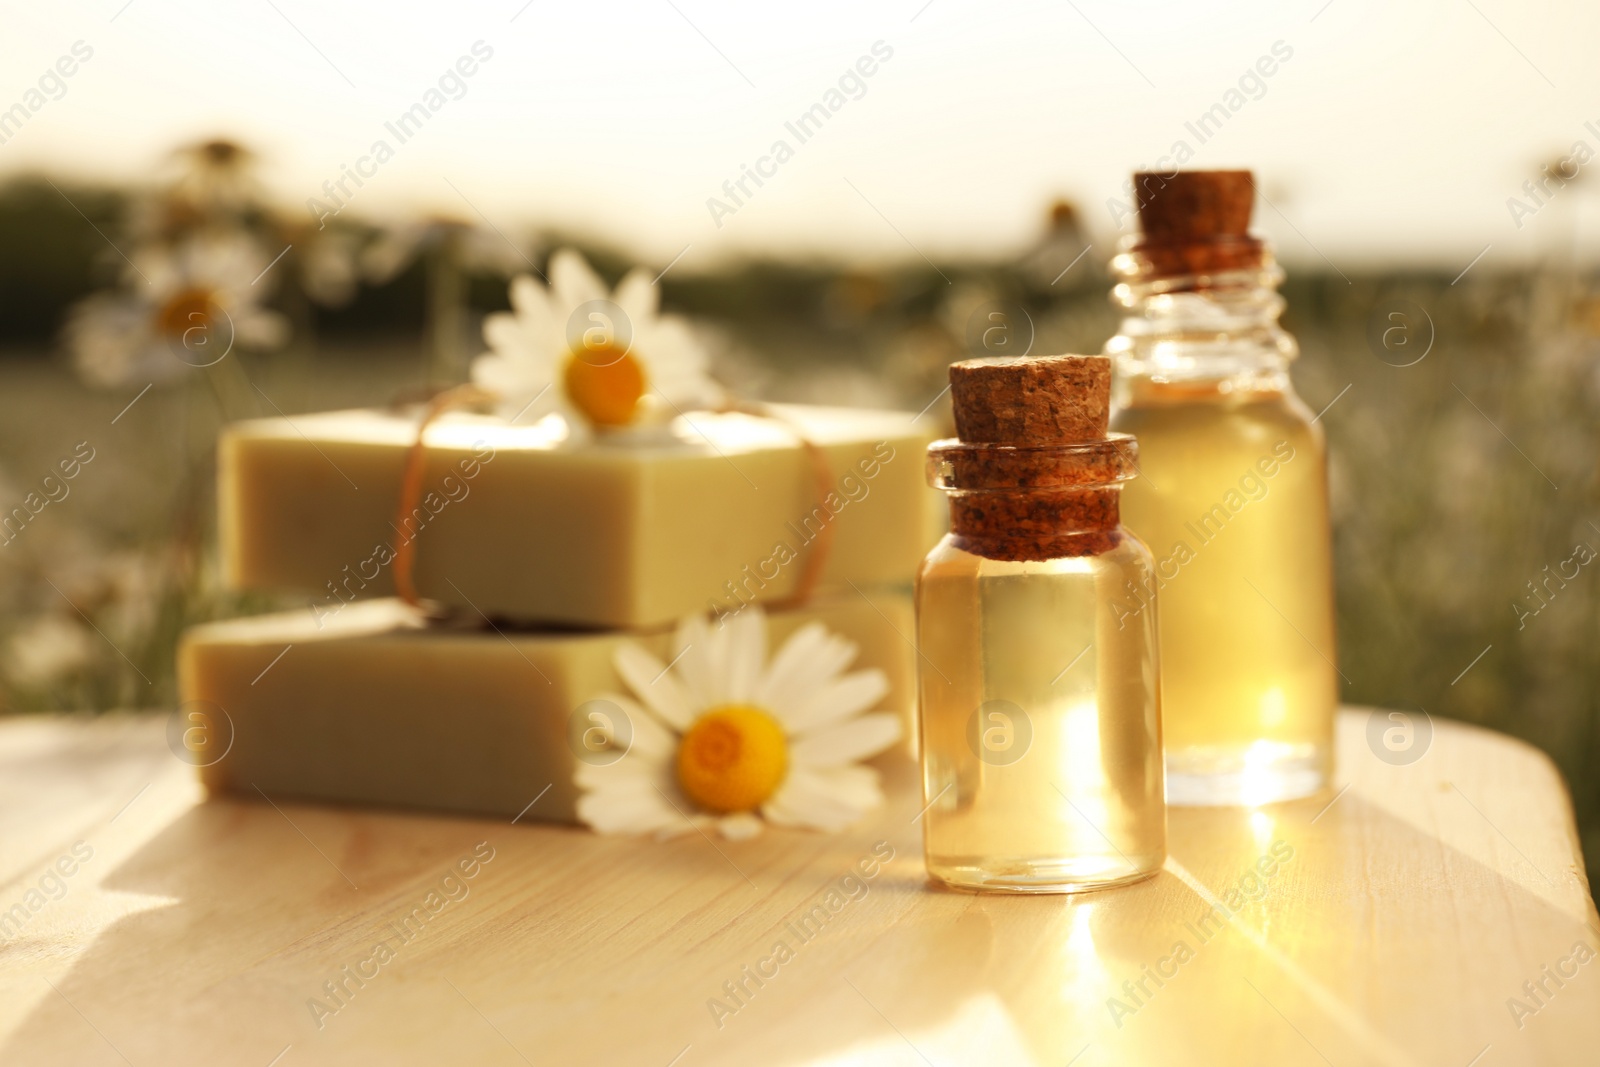 Photo of Bottles of chamomile essential oil and soap bars on wooden table in field